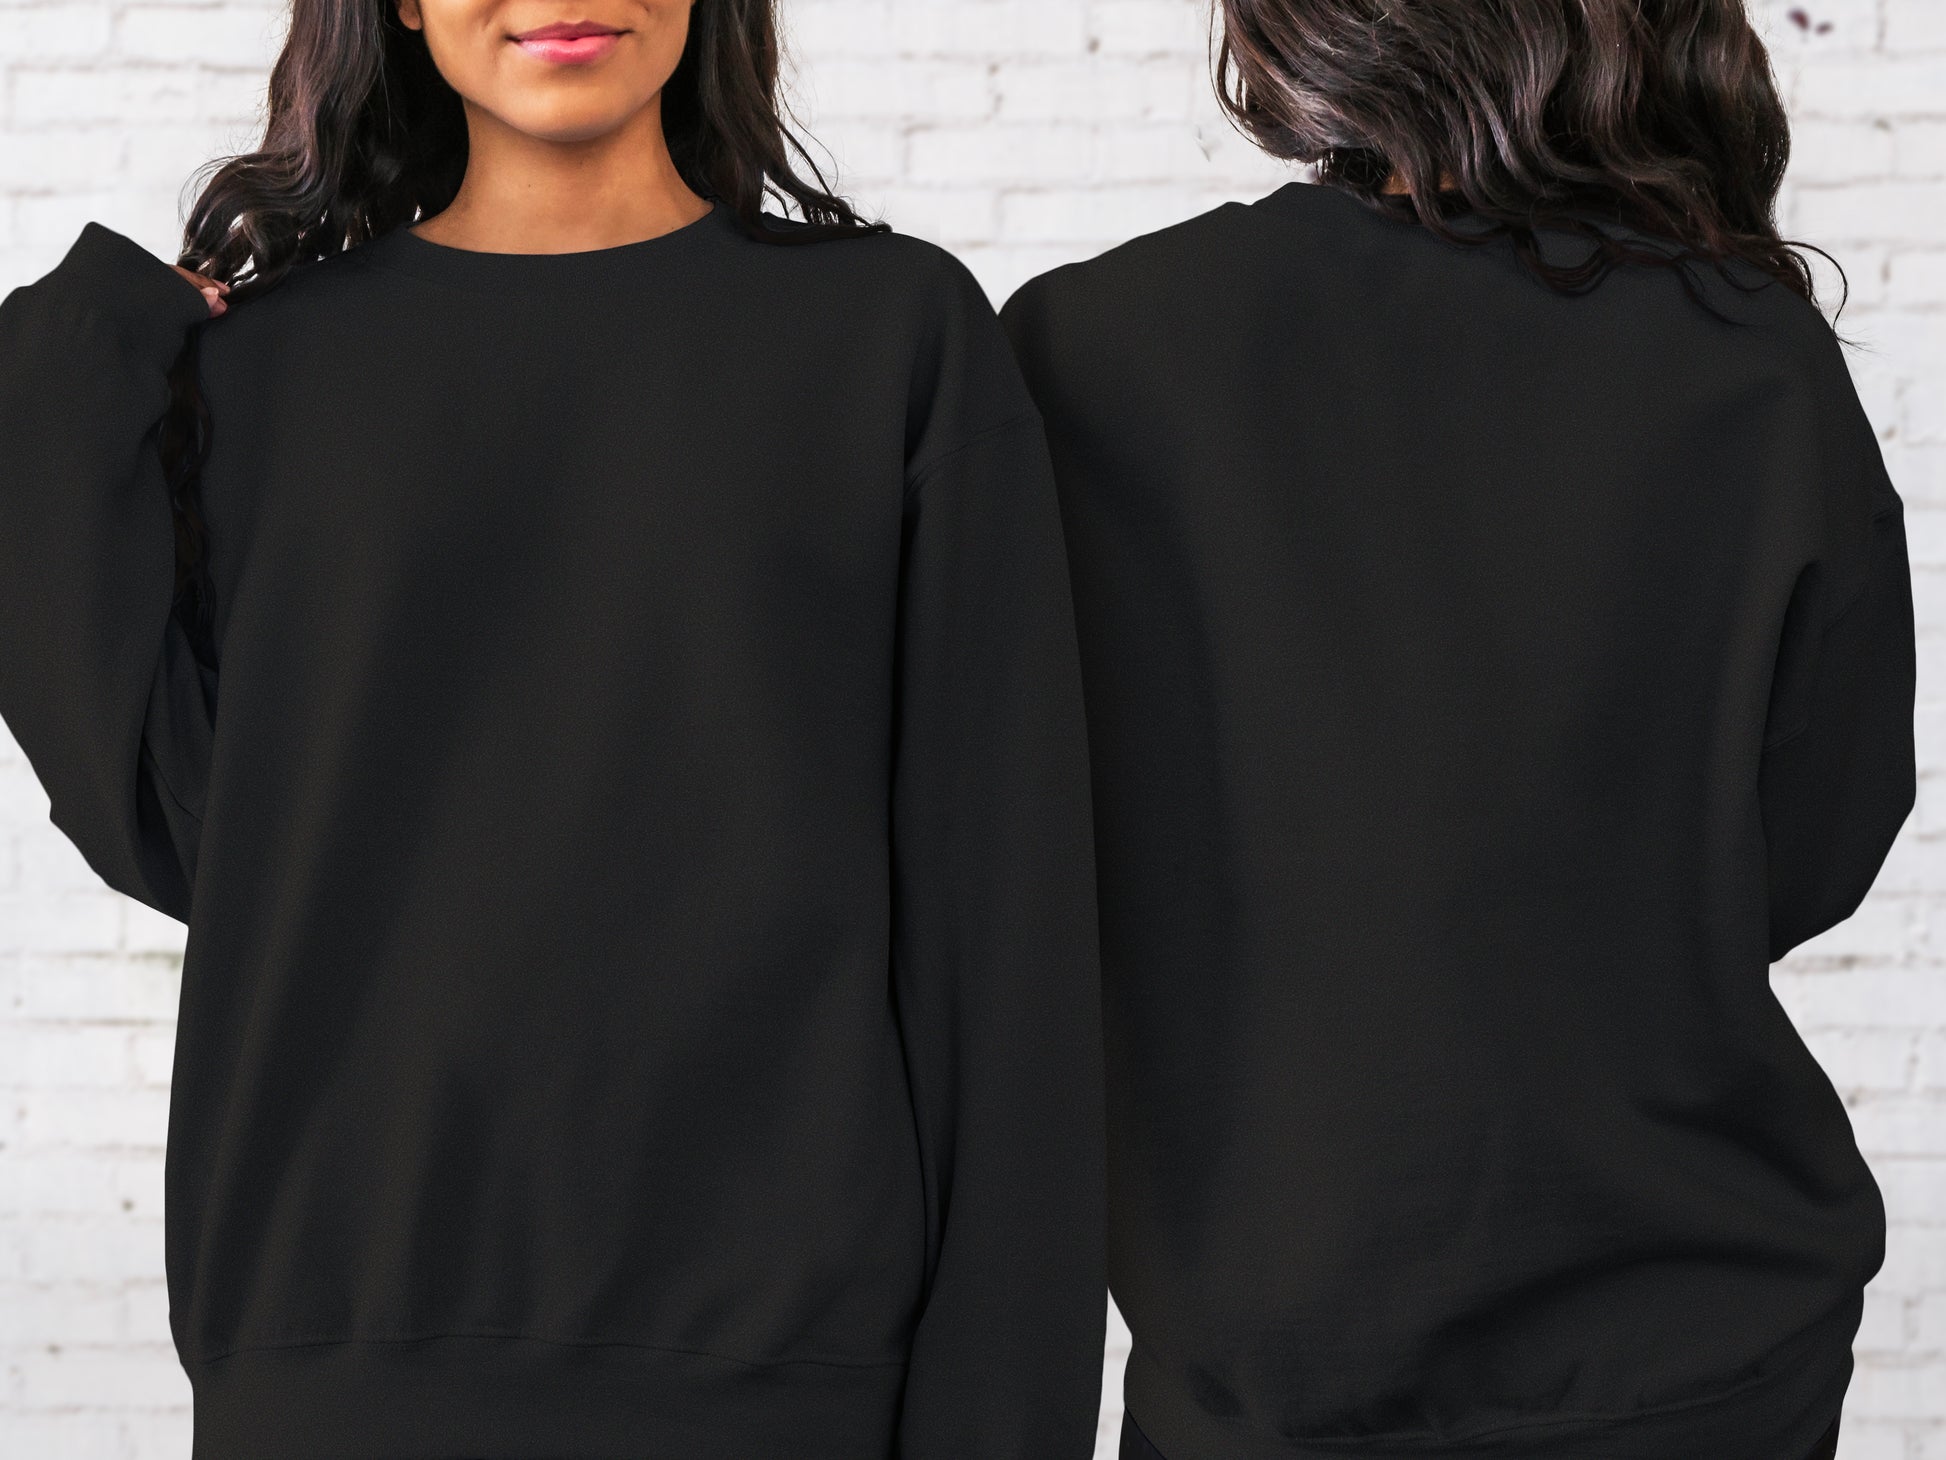 Mom Bruh Unisex Crewneck Sweatshirt Our sweatshirts are made of a heavy, yet soft and breathable material that maintains it's shape and size. Pair it with your favourite jeans or joggers for a casual look. Black